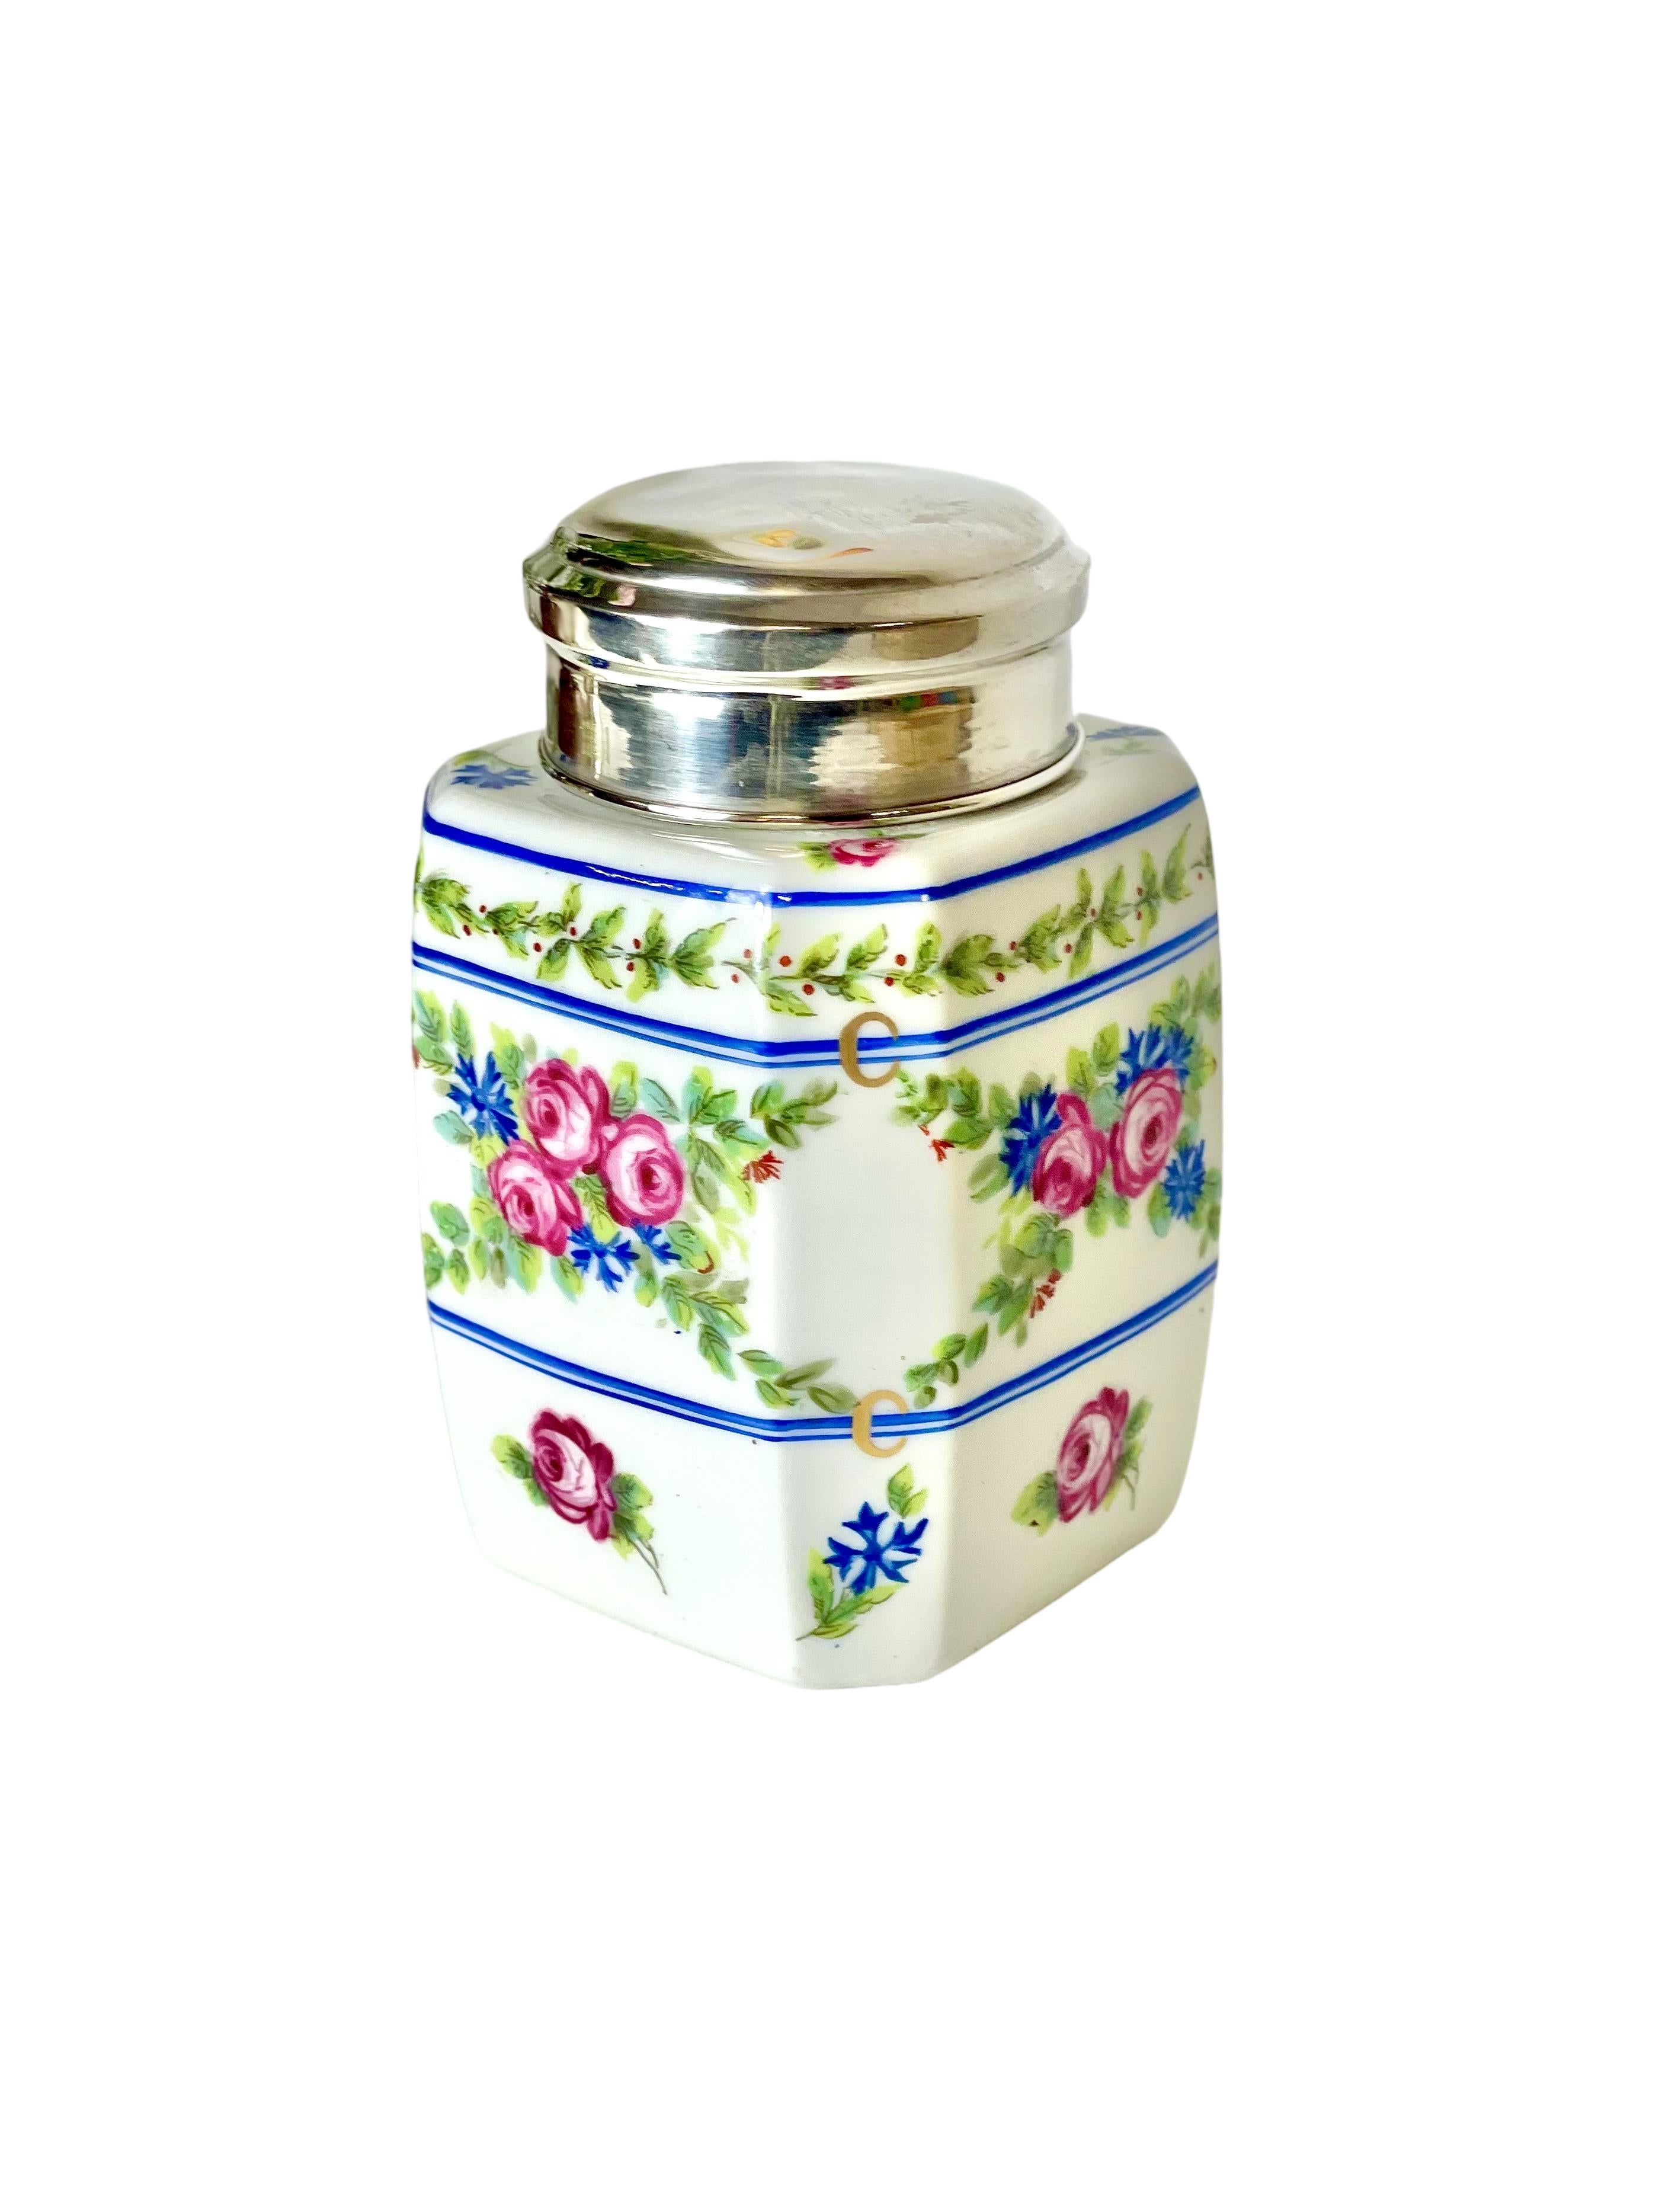 A very pretty silver-topped jar in Limoges porcelain, featuring a fresh and delicate hand-painted design of wild rosebuds, cornflowers and hawthorn branches, enclosed within concentric bands of cobalt blue. The lid is easily removable, making it an